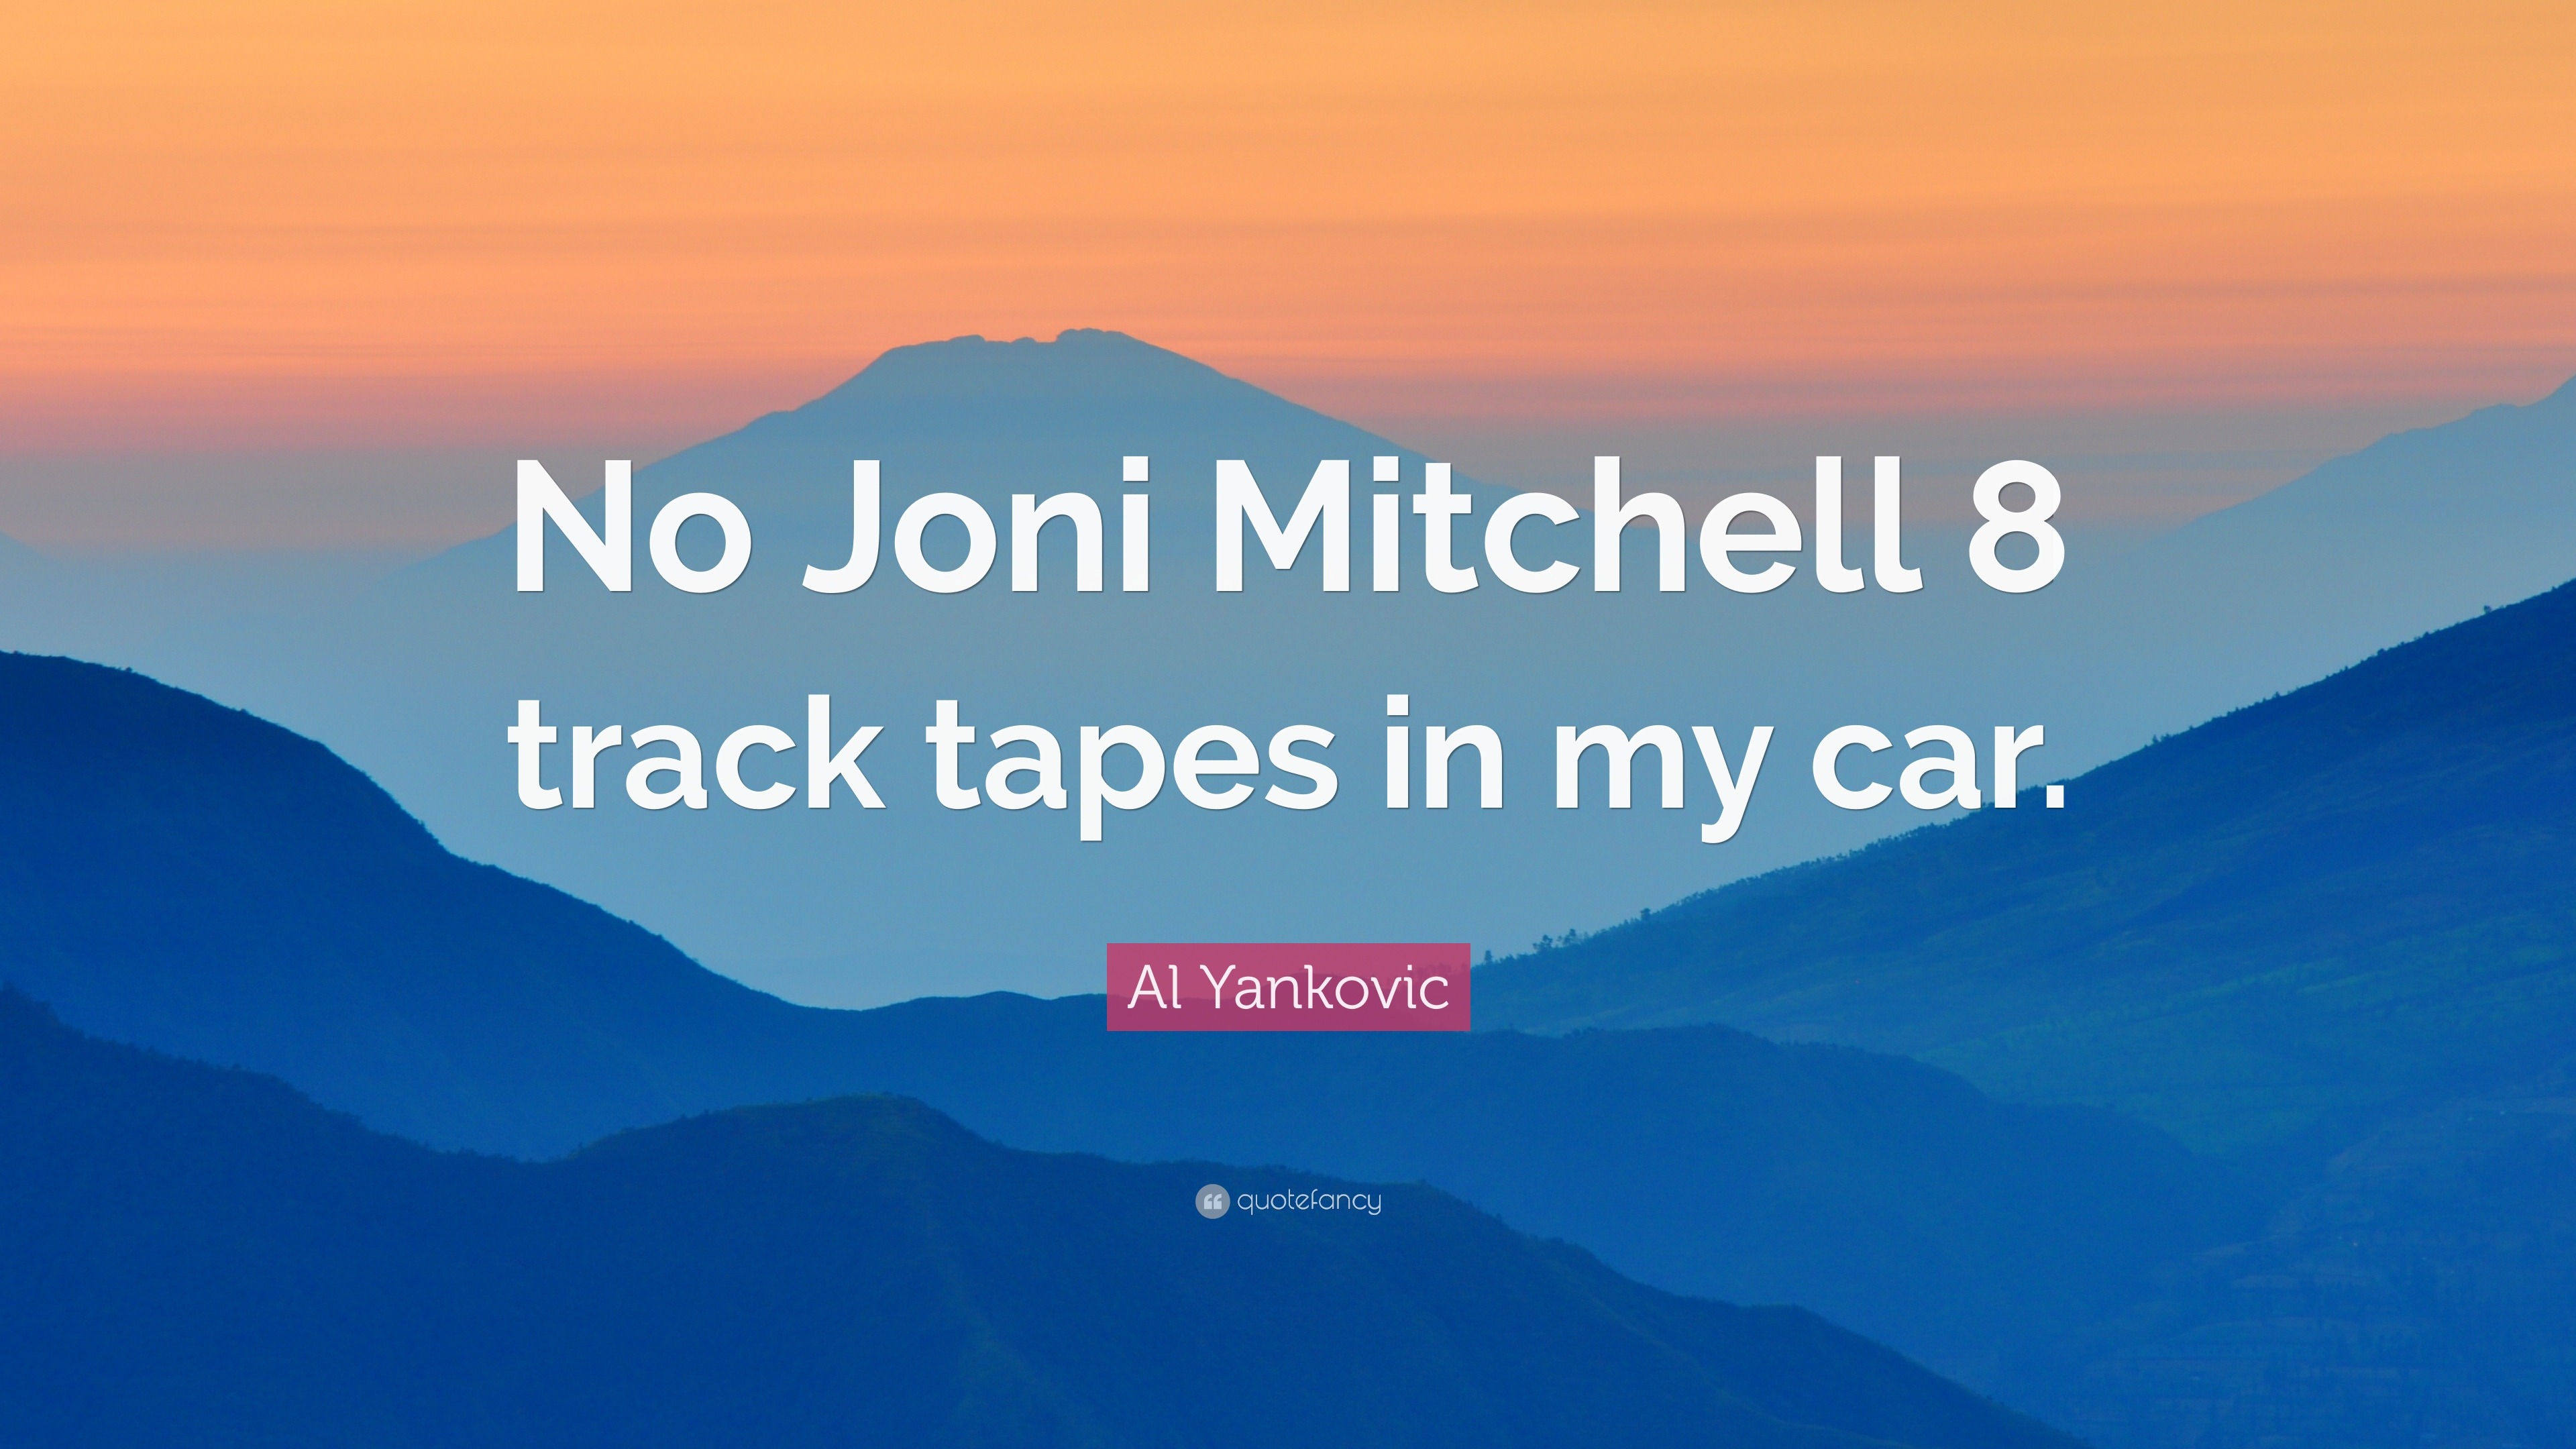 Al Yankovic Quote No Joni Mitchell 8 Track Tapes In My Car 7